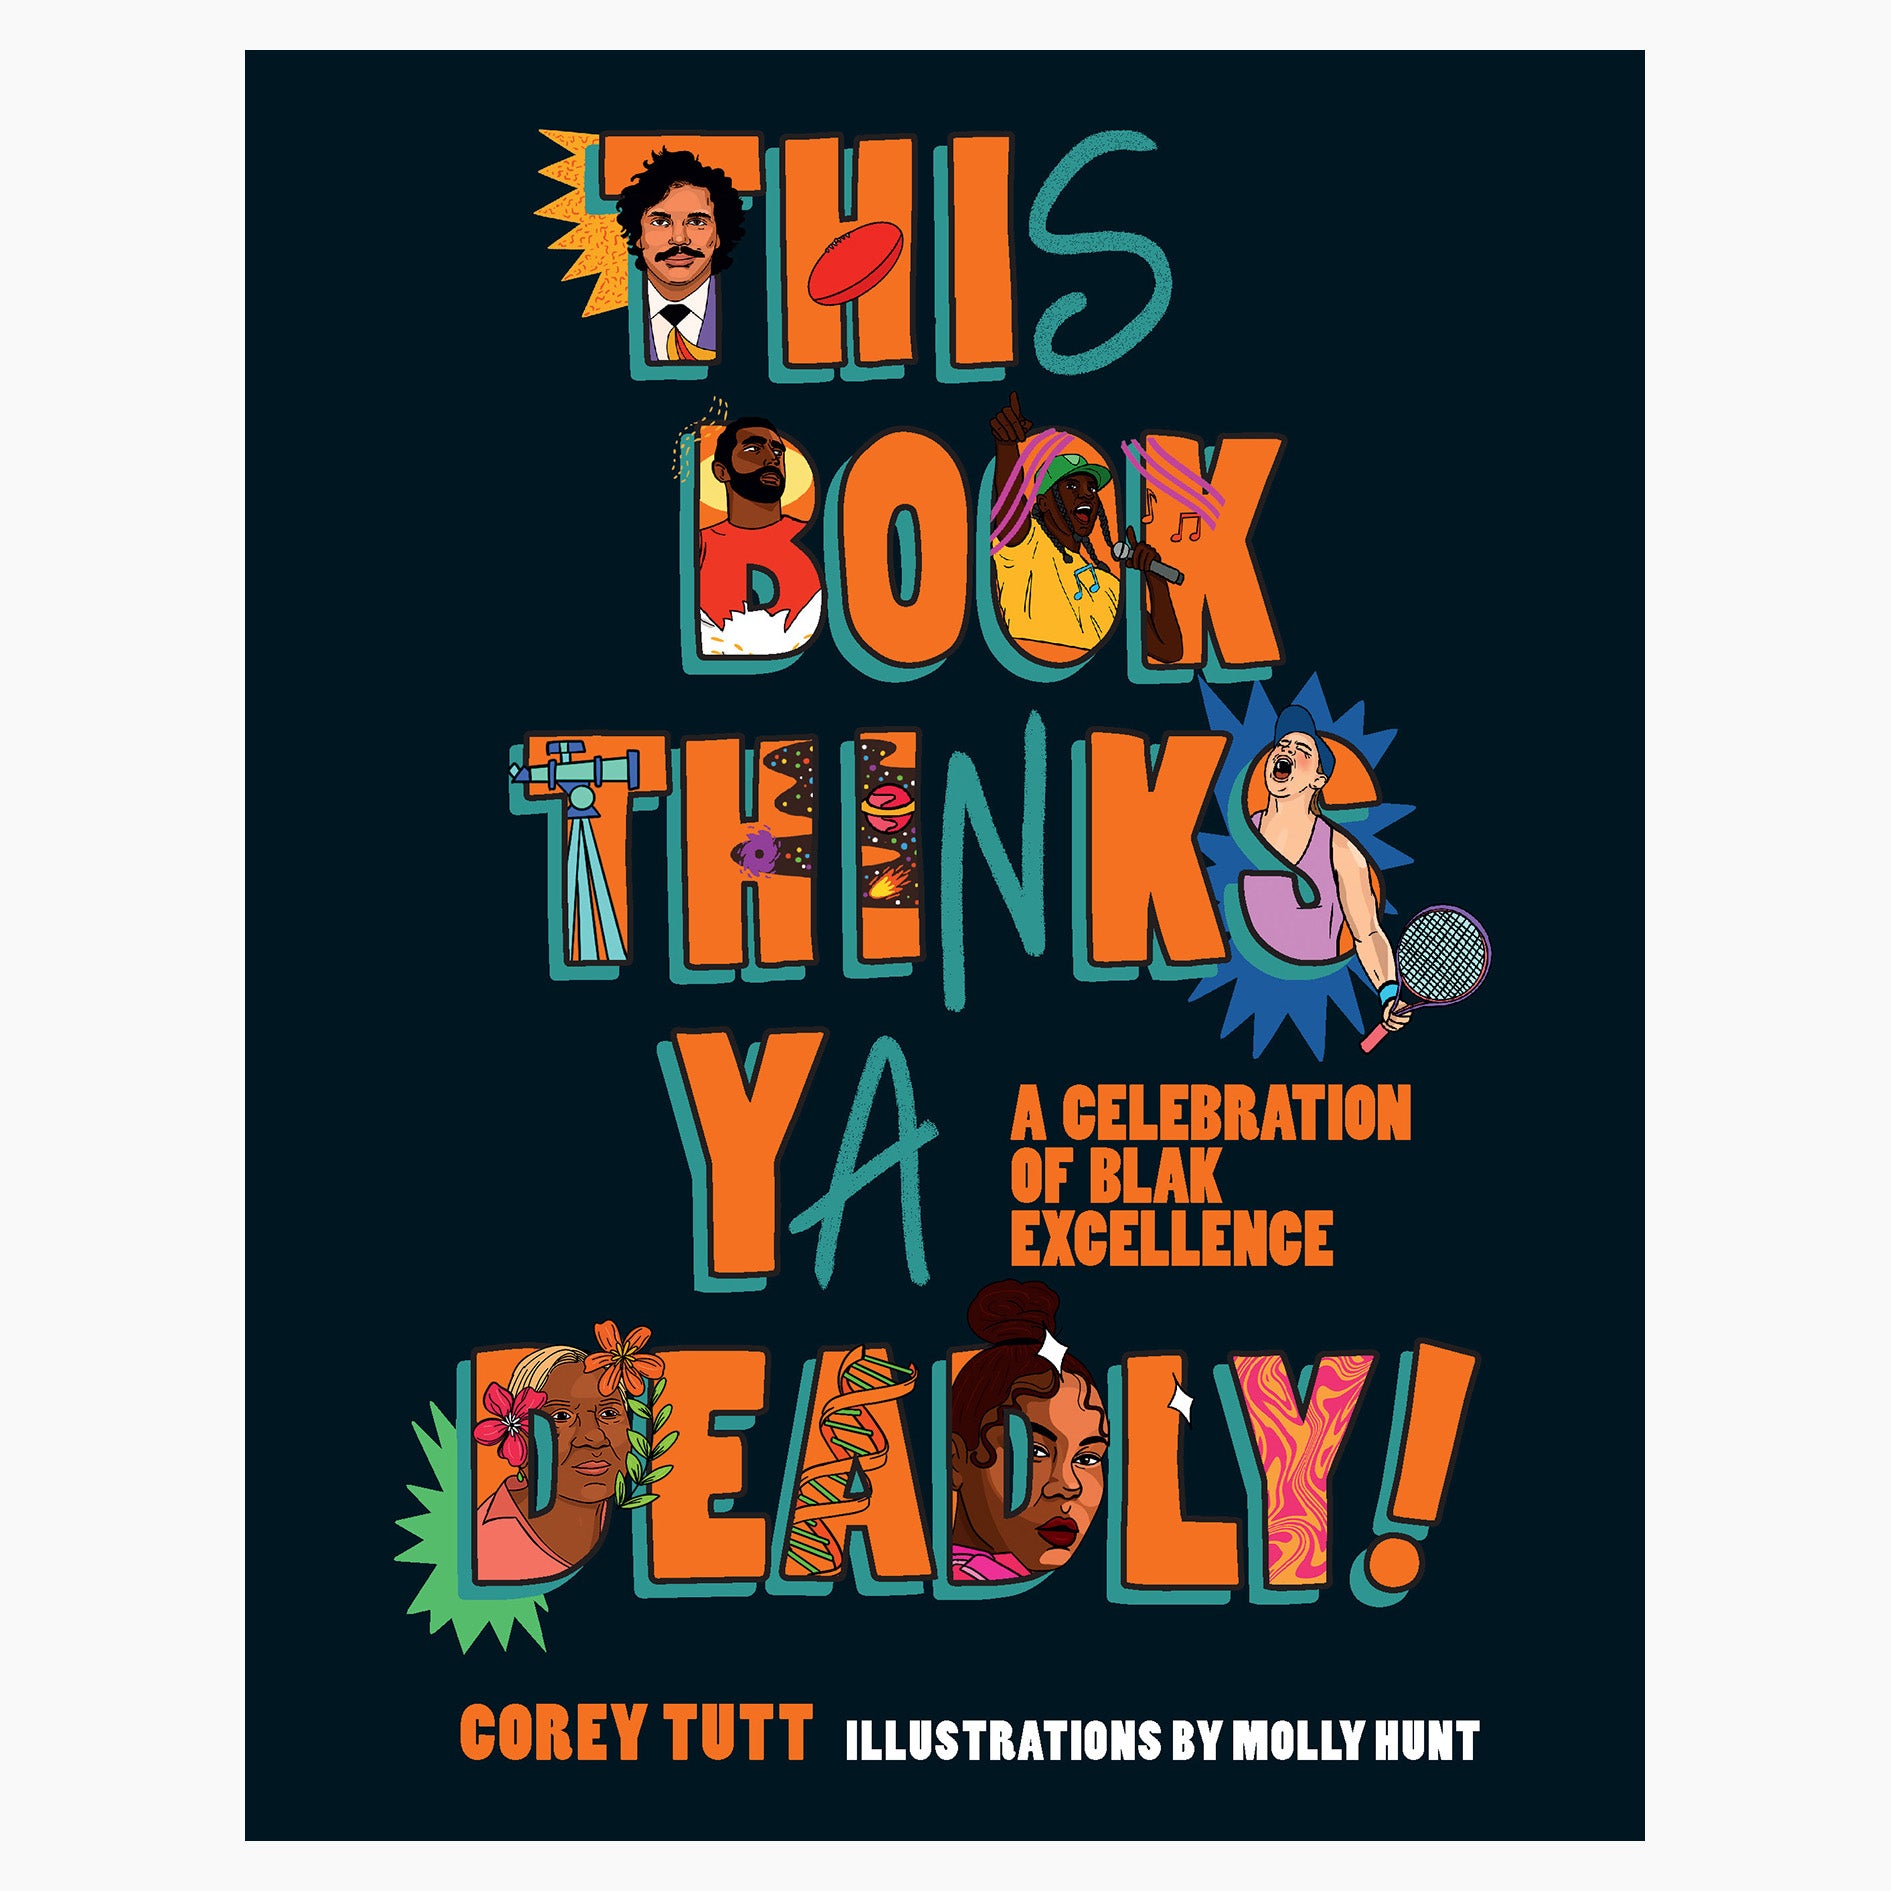 This Book Thinks Ya Deadly!